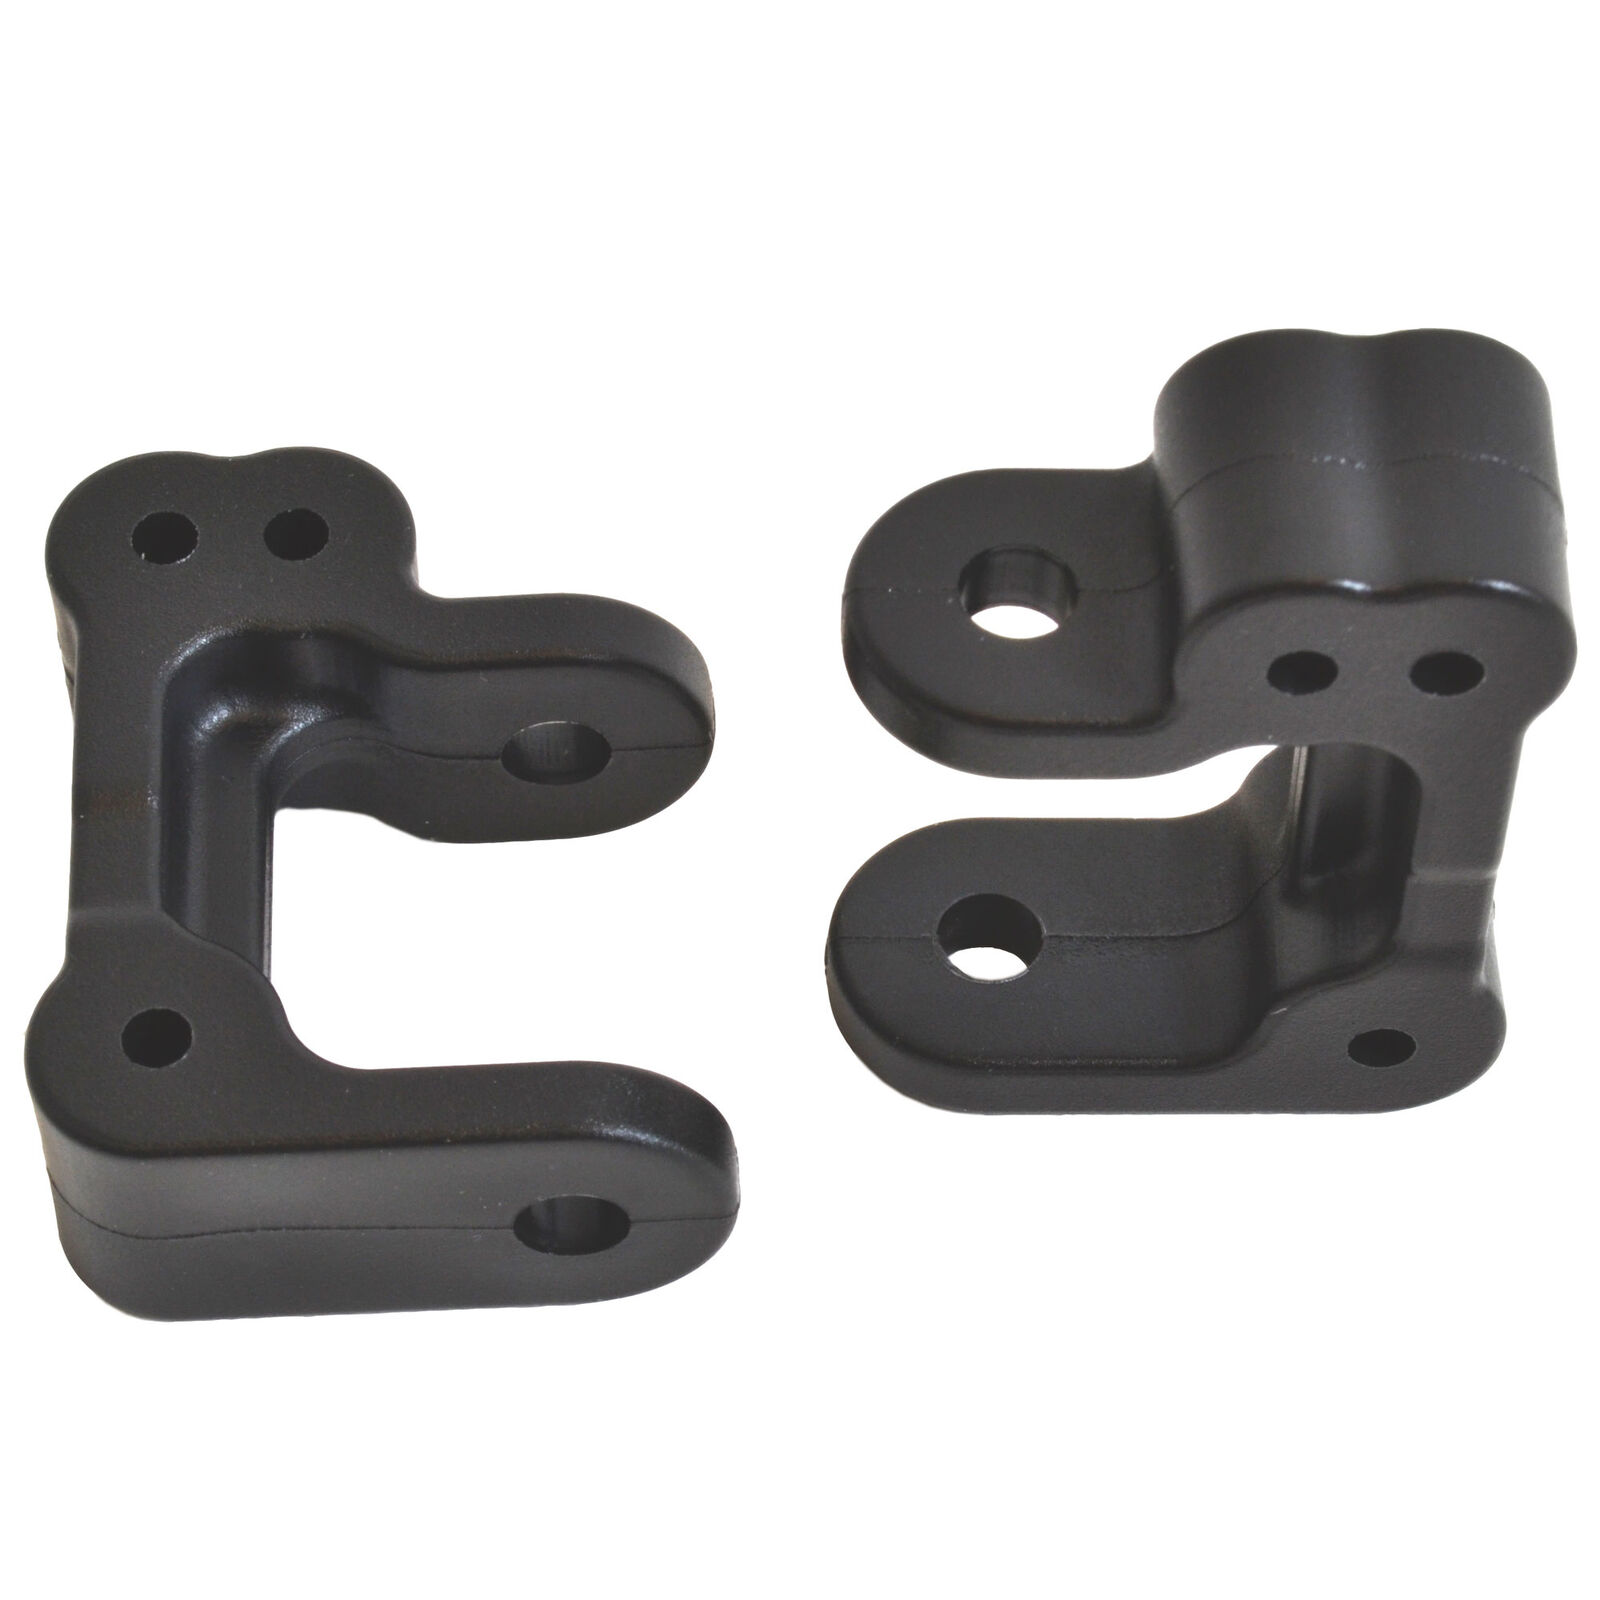 Heavy Duty Caster Blocks, Black (2): Torment 2WD, Ruckus 2WD, Circuit 2WD, Boost 2WD, AMP 2WD